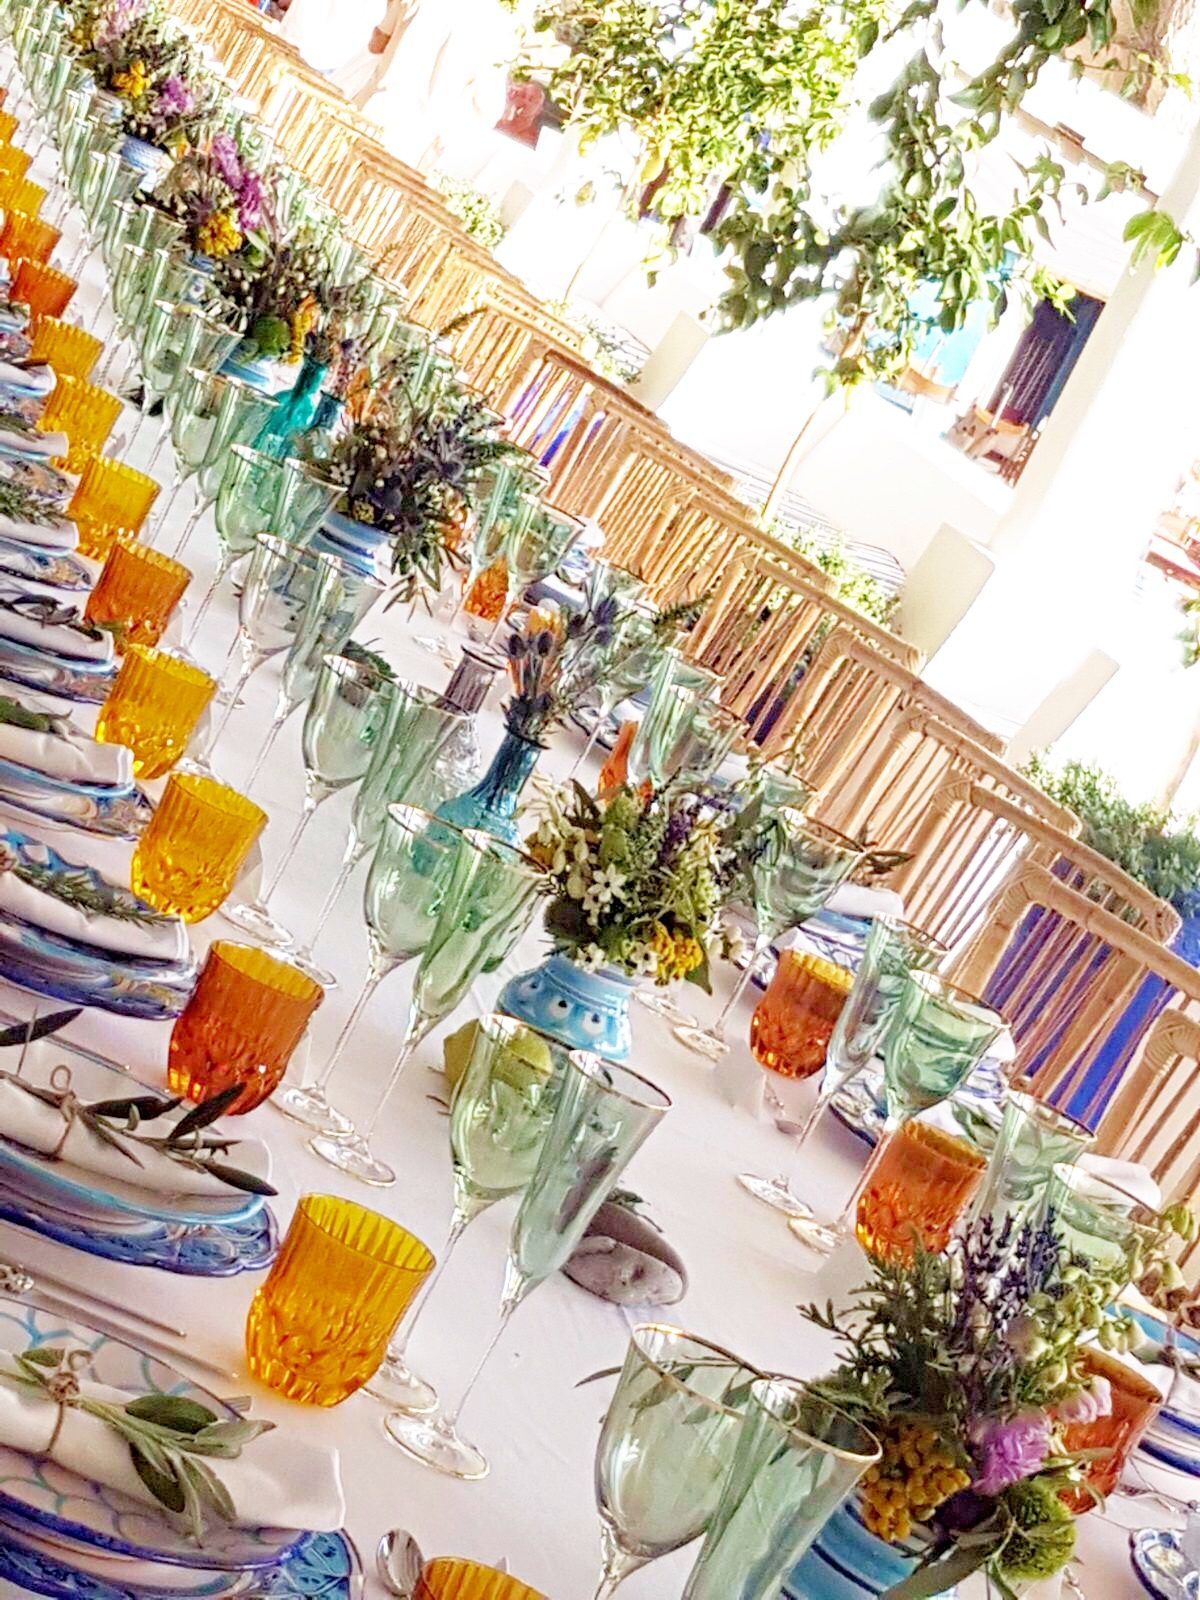 Anna and Charles - wedding table colorful decorations featured on vogue.de